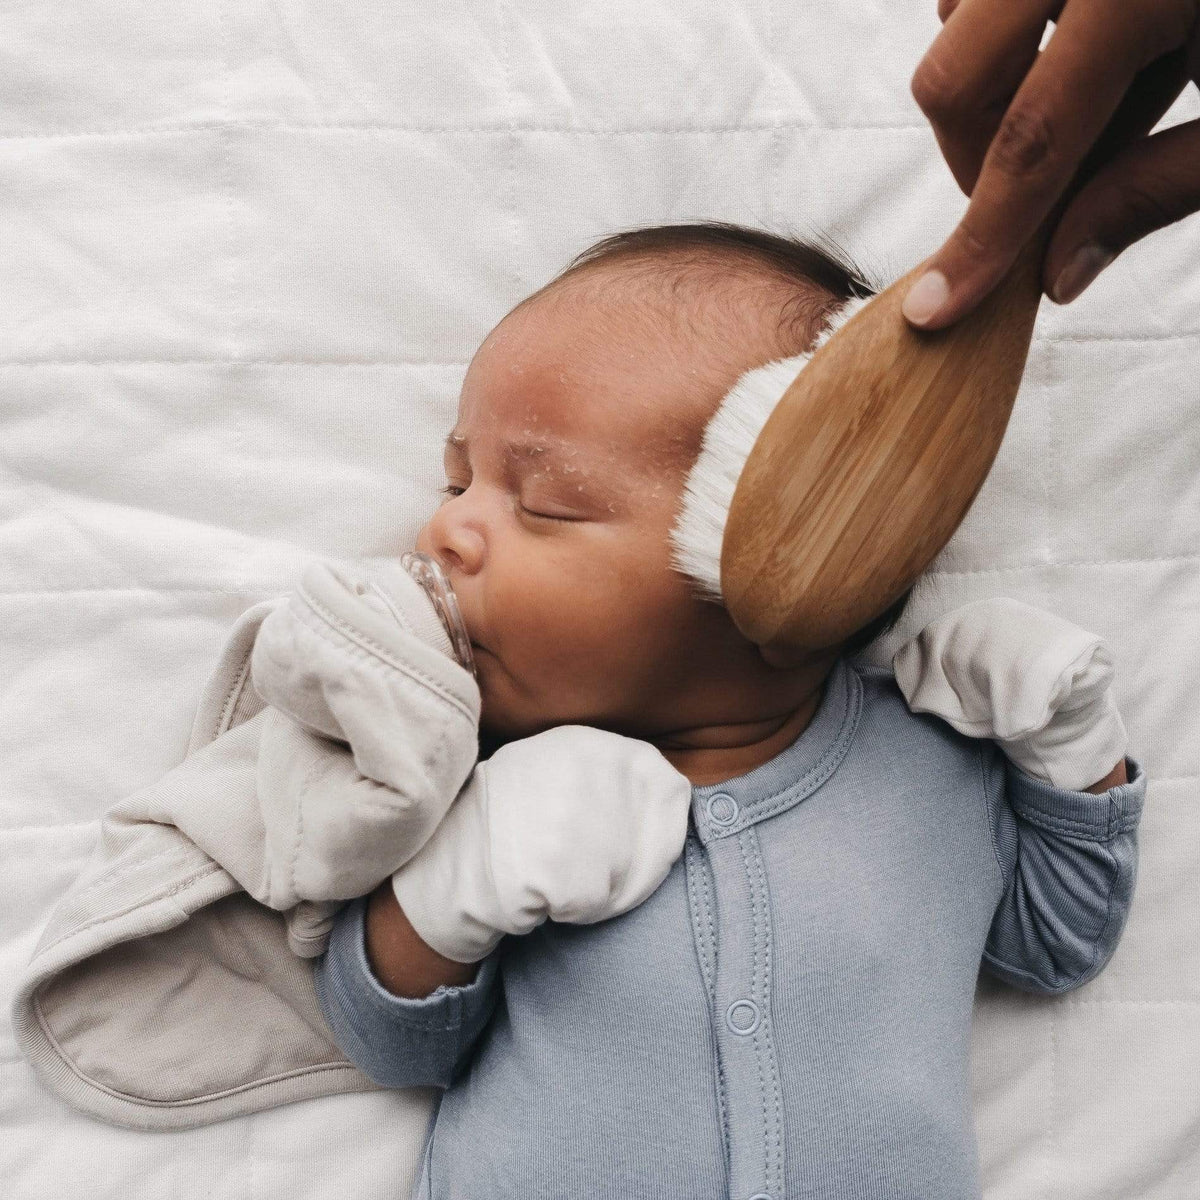 Parent using Kyte Baby brush for cradle cap on infant